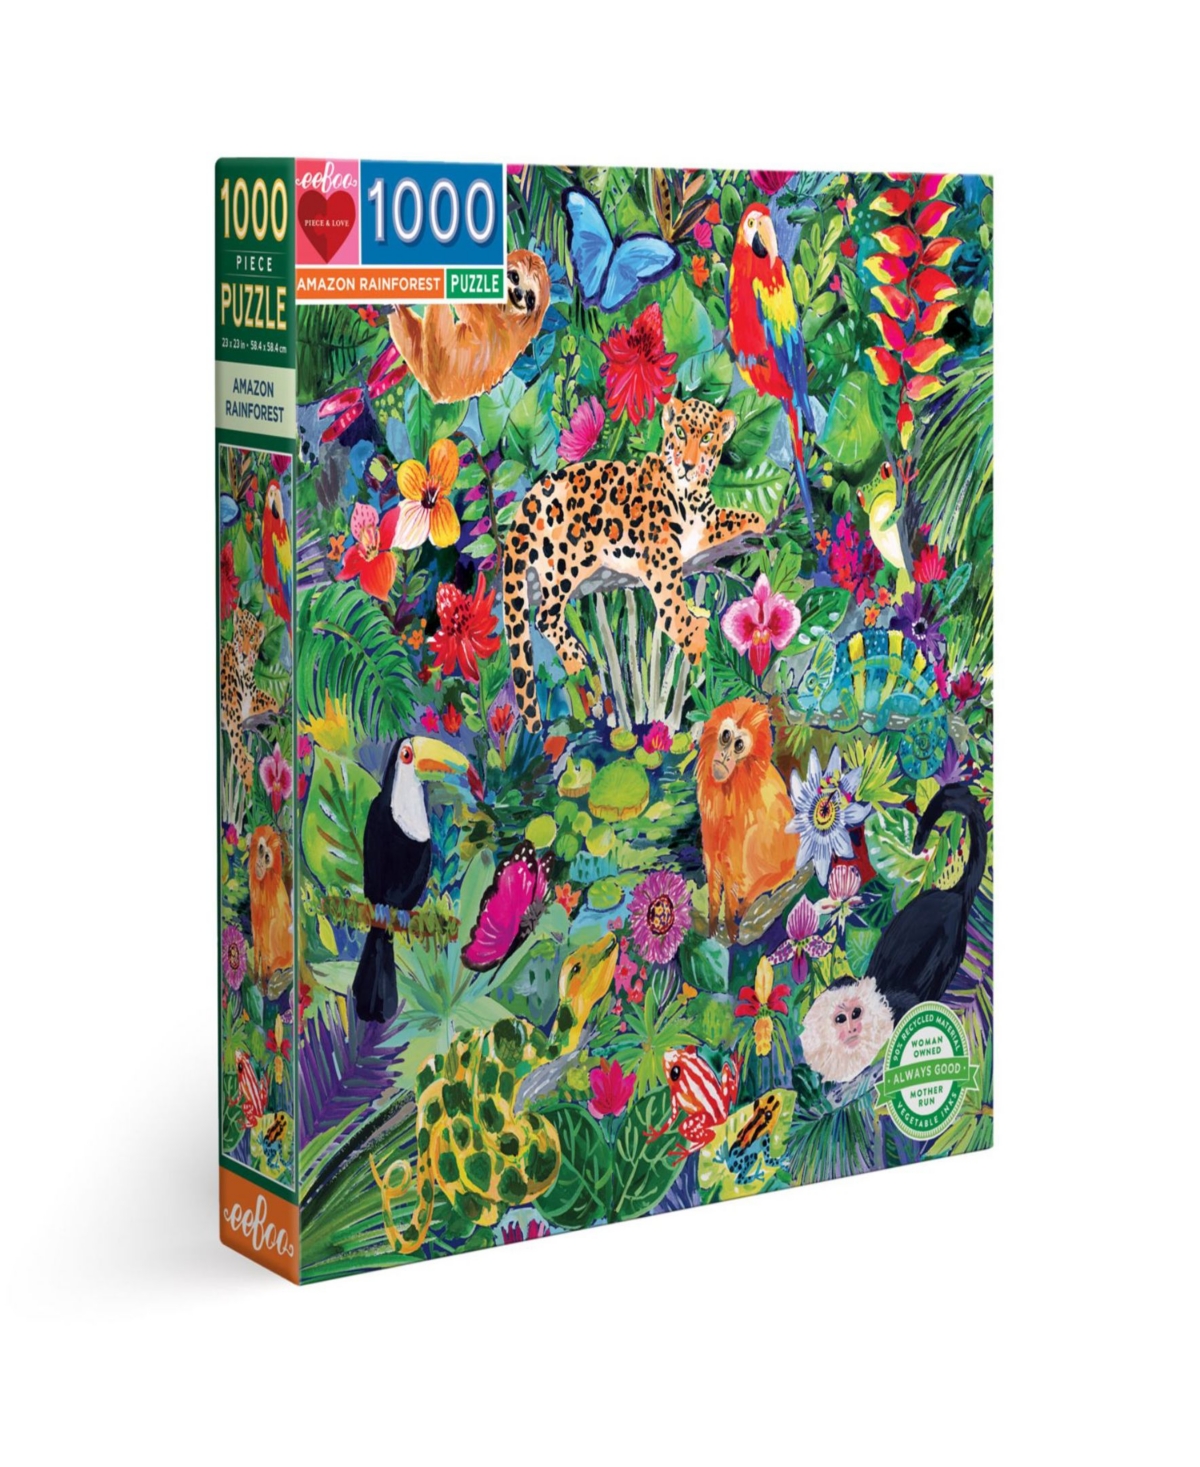 Eeboo Piece And Love Amazon Rainforest 1000 Piece Square Adult Jigsaw Puzzle Set In Multi